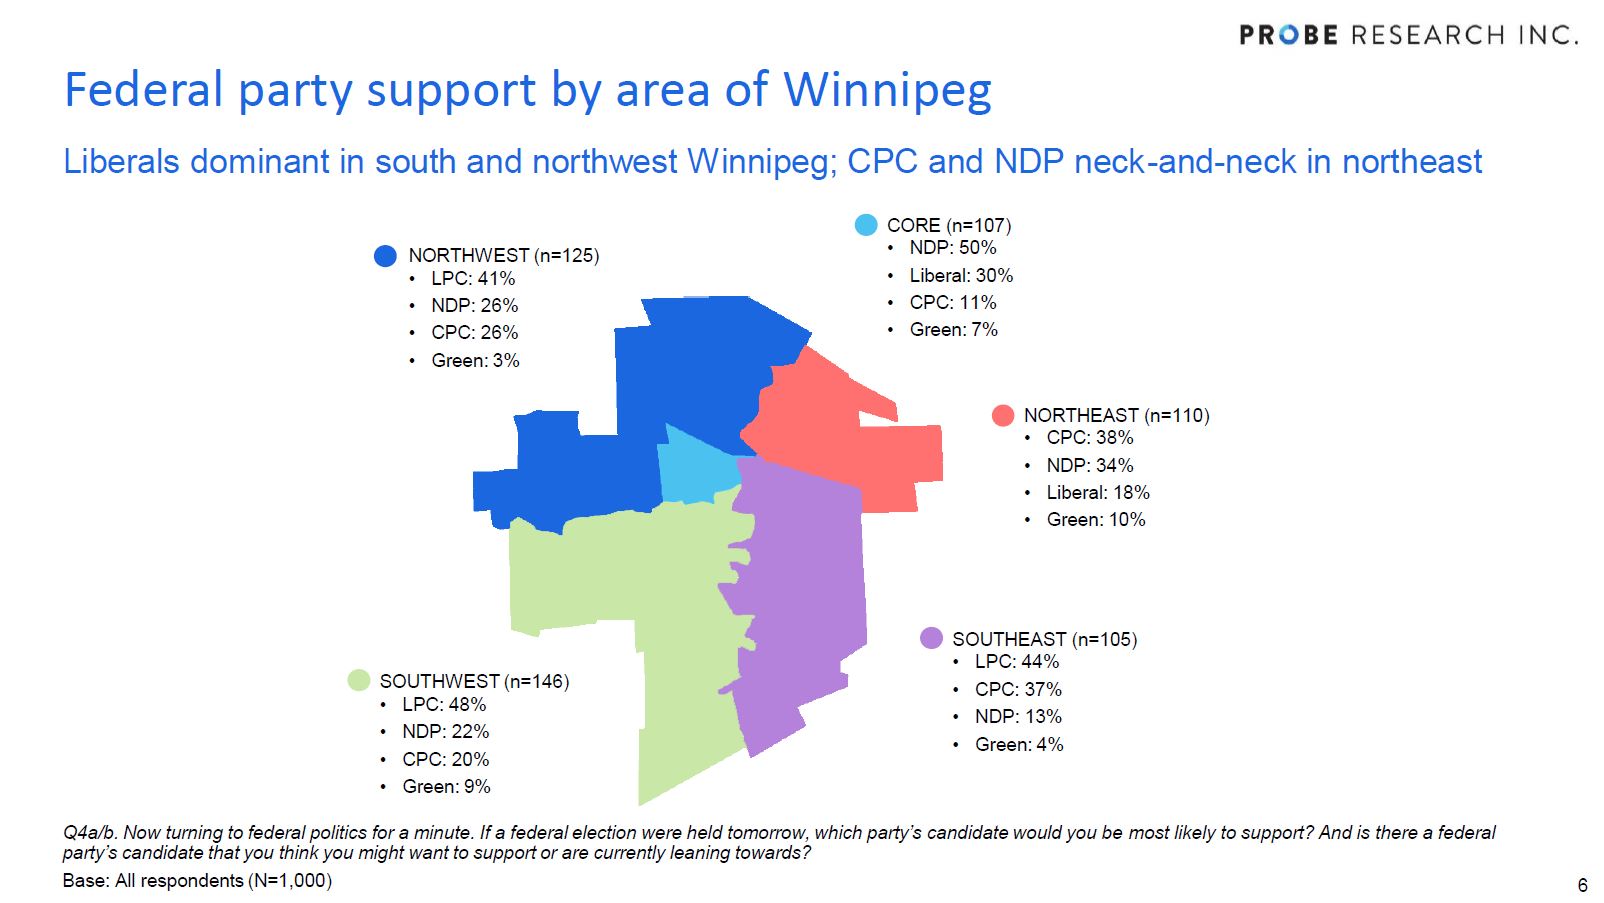 federal vote intention by area of Winnipeg - March 2021